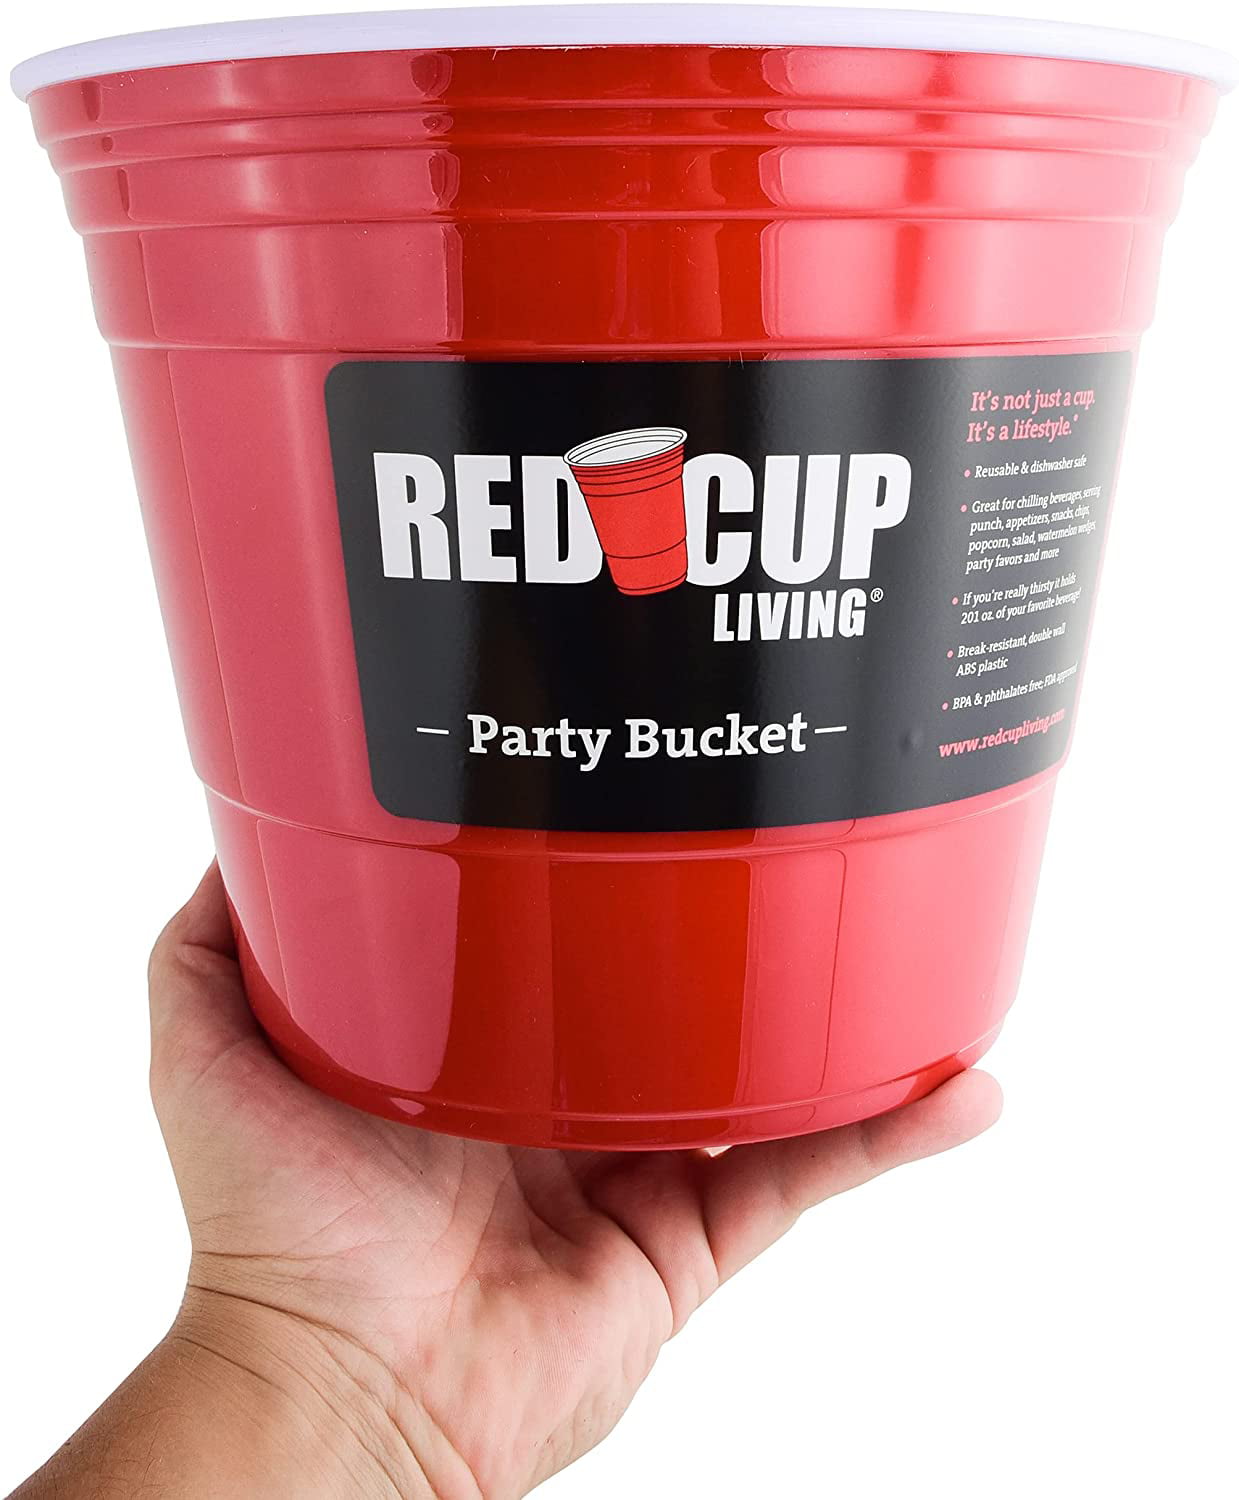 Our favorite ubiquitous red plastic cup gets a seriously stylish